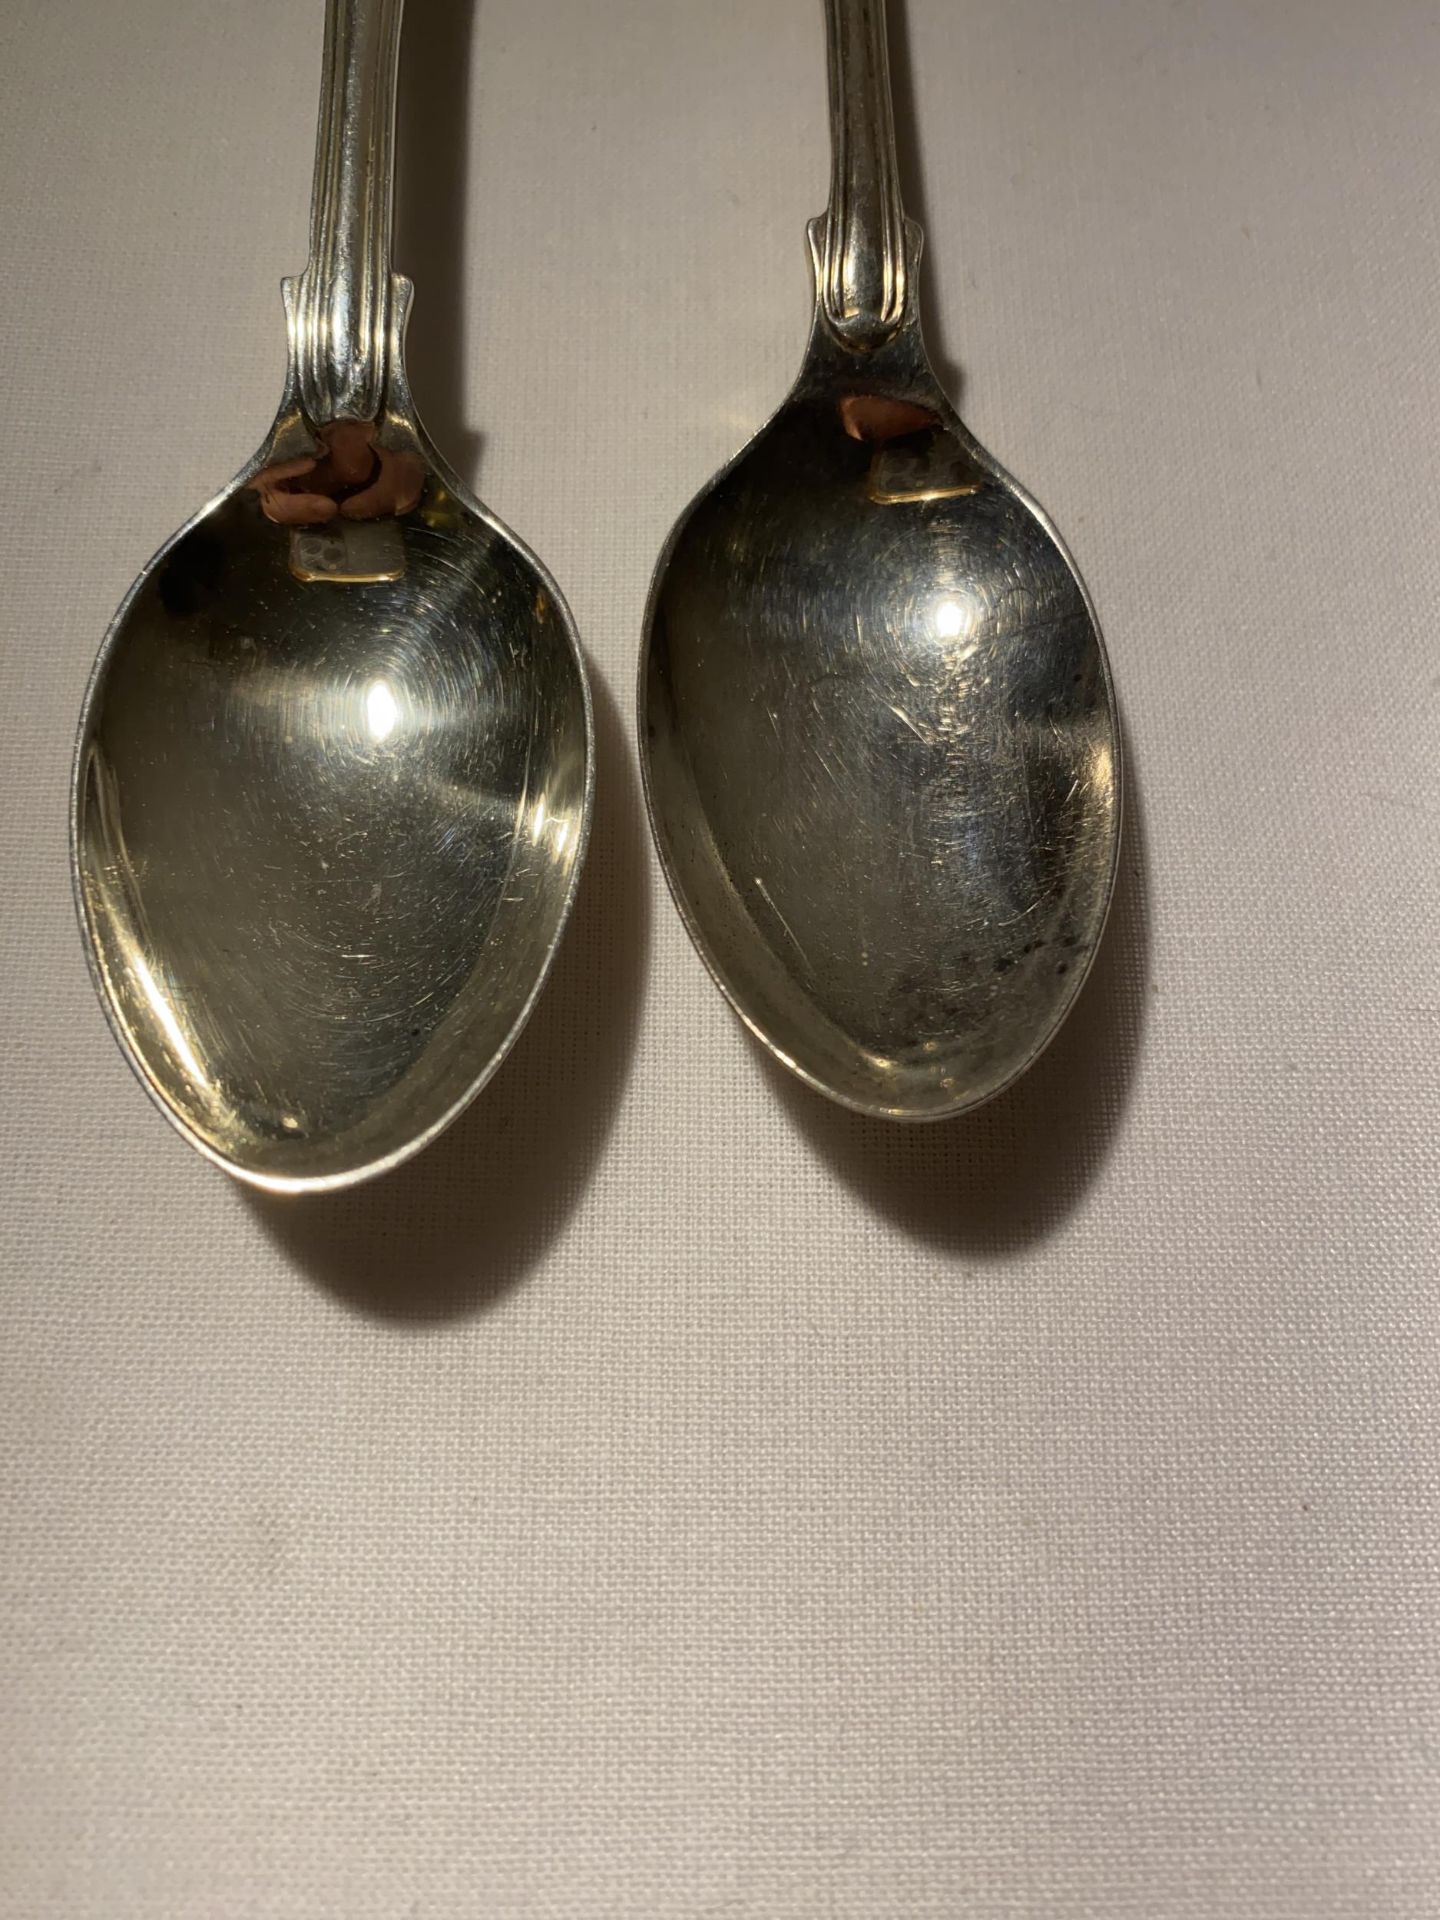 TWO SHEFFIELD HALLMARKED SILVER SPOONS, EARLIEST BEING 1925, MAKER WILLIAM HUTTON & SONS LTD, - Image 5 of 18